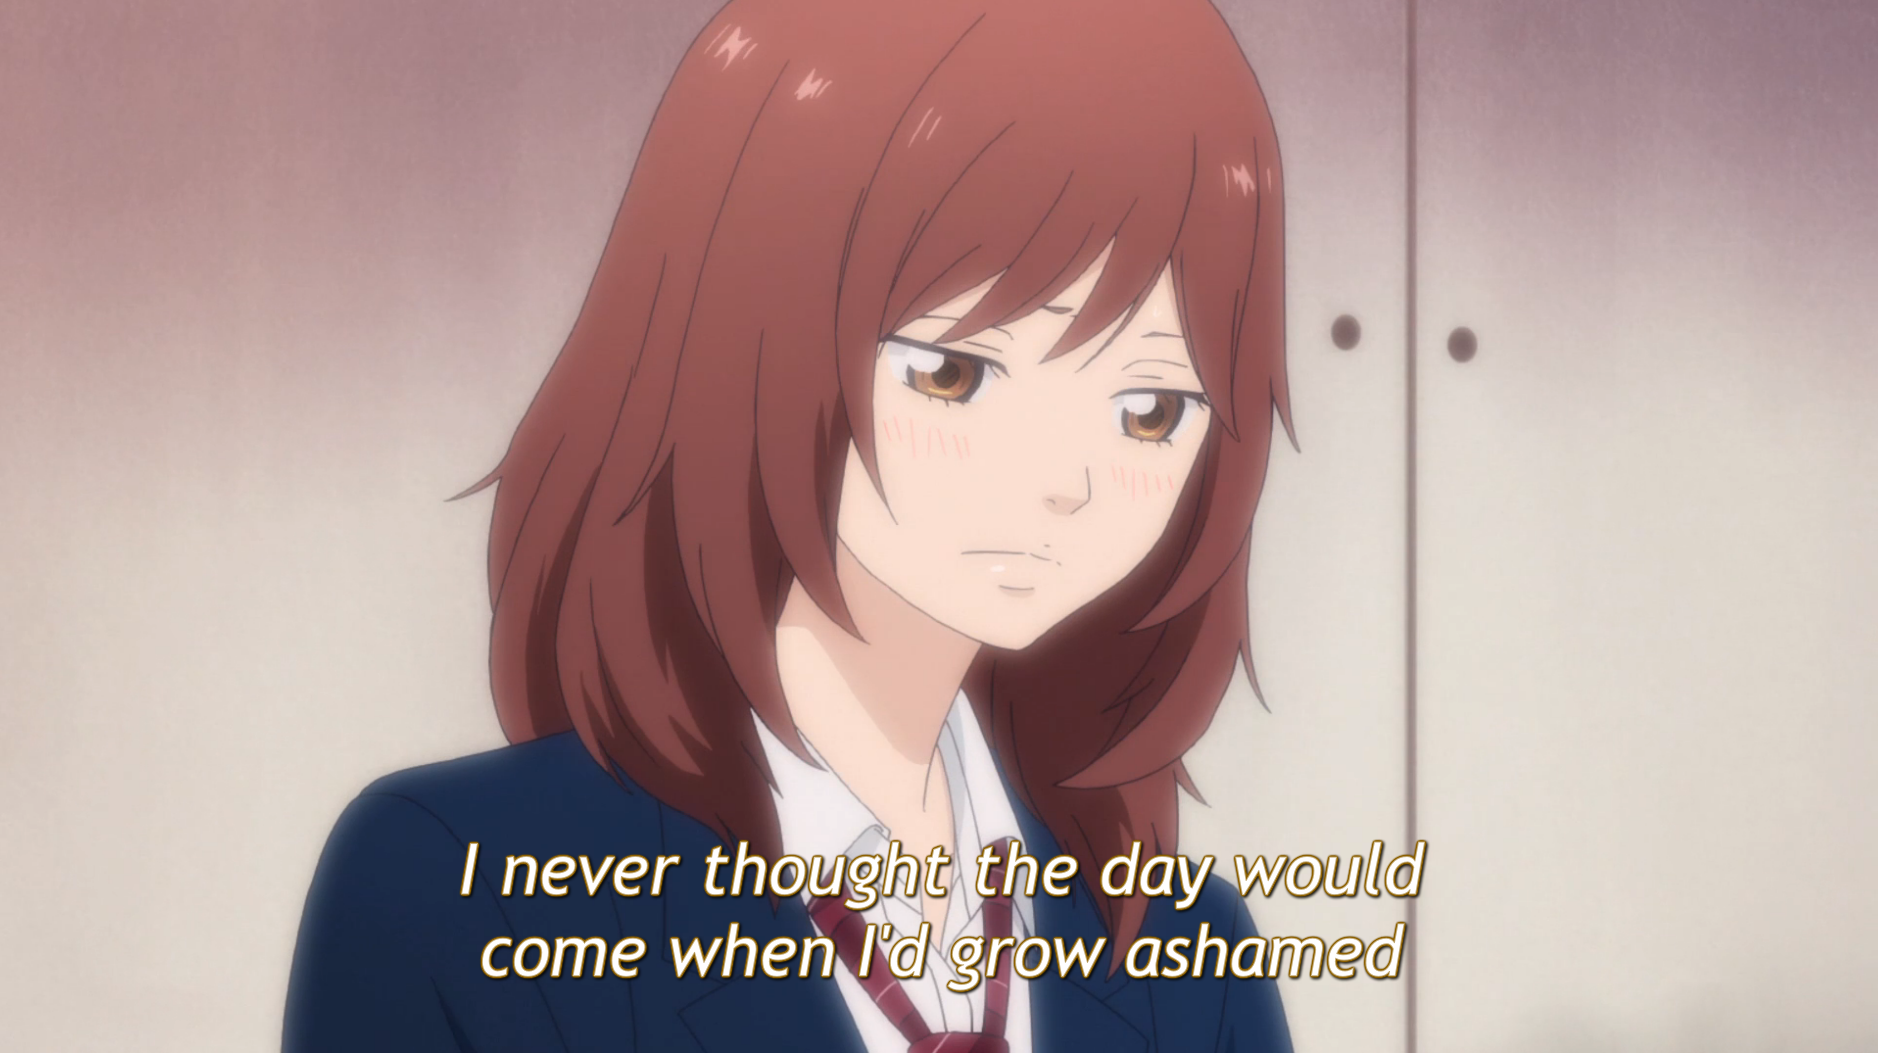 Blue Spring Ride Episode 7 - I Just Have to Tell Her